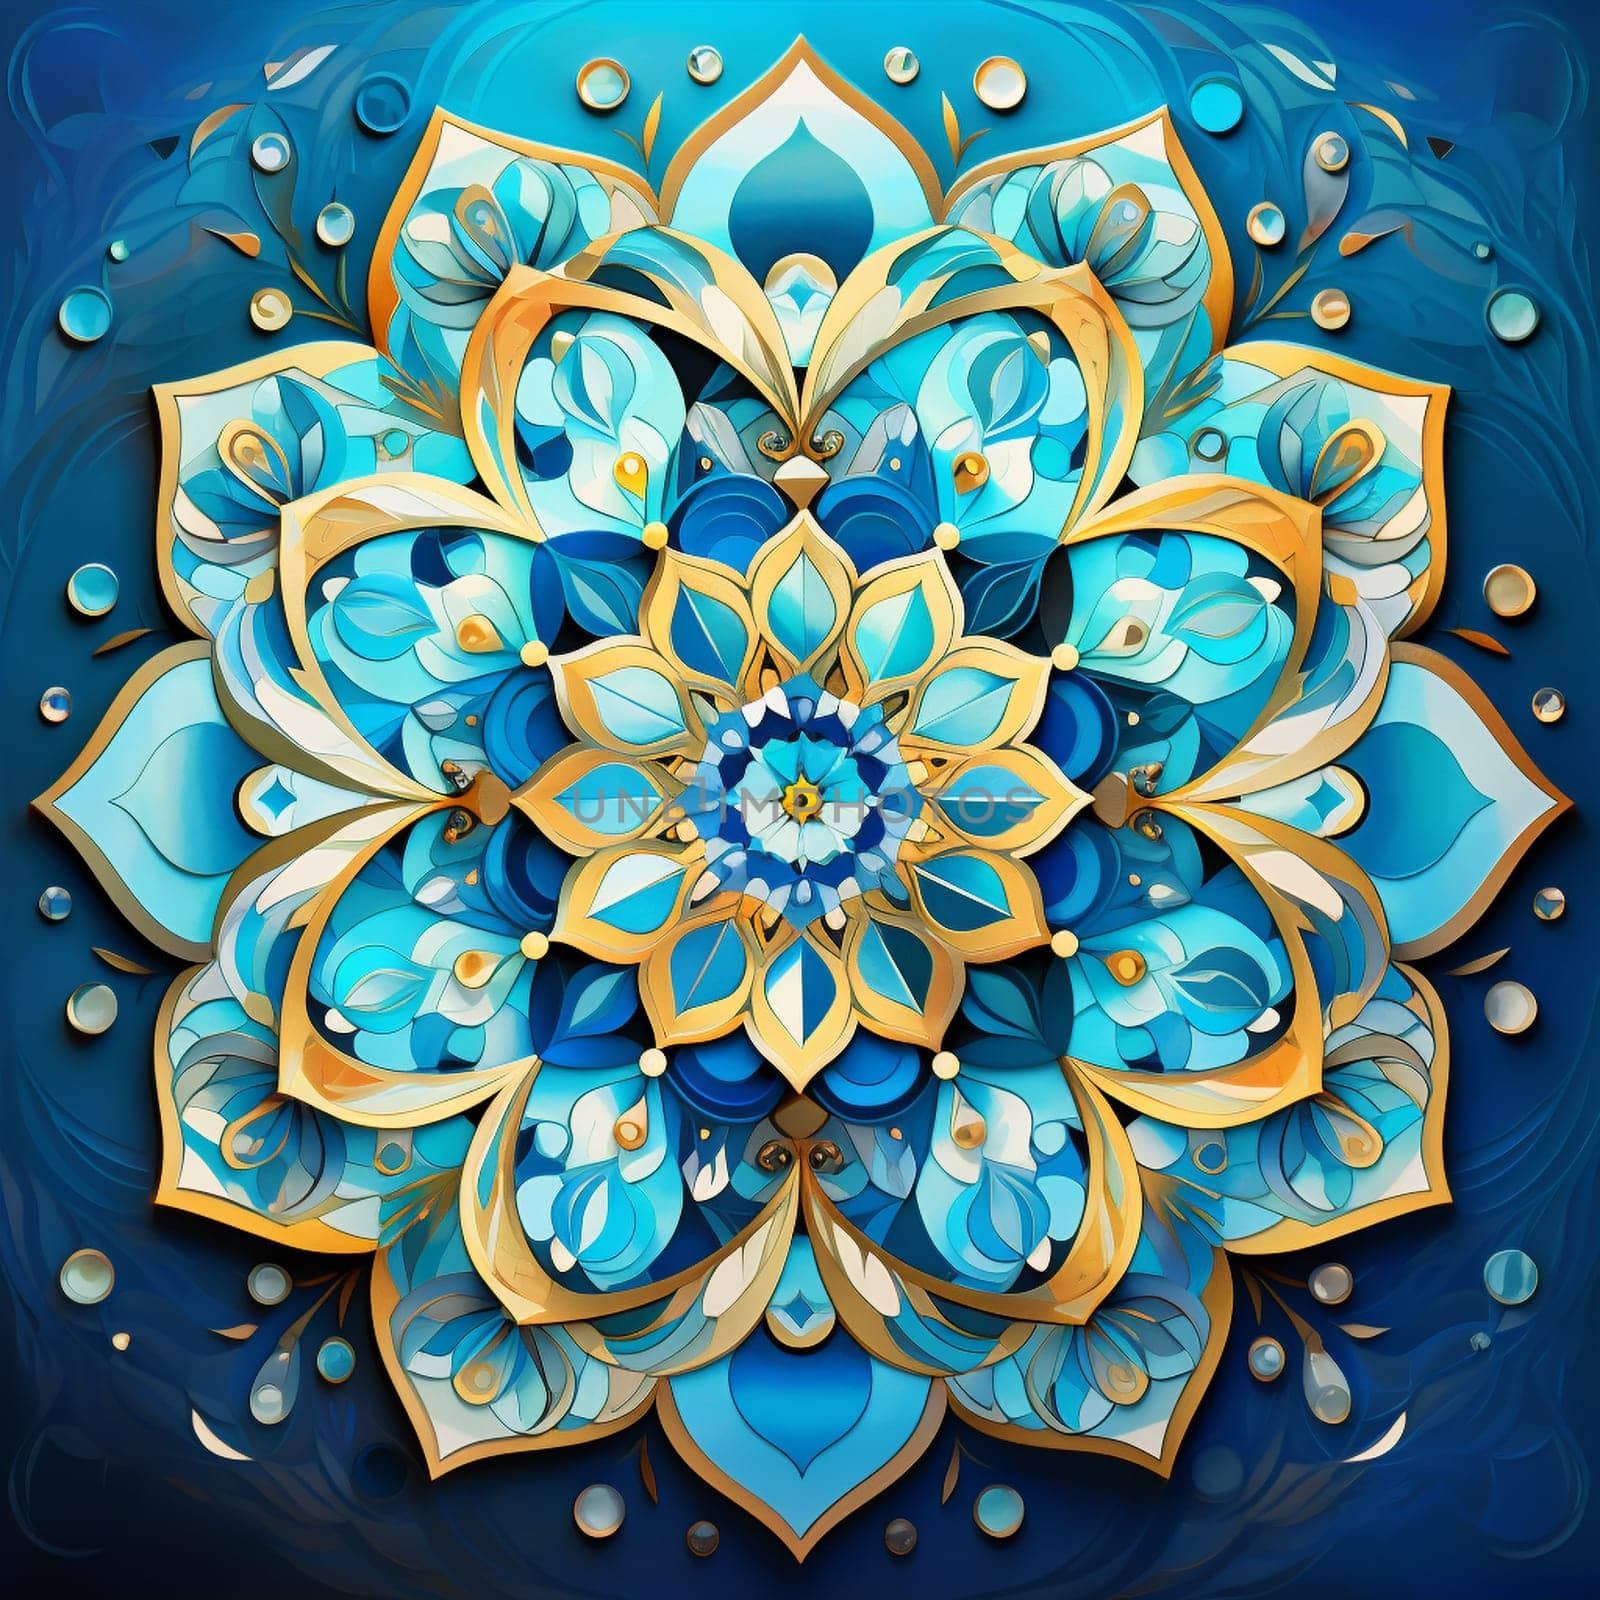 Get ready to dive into a mesmerizing world of the ocean with this Nautical Kaleidoscope! This unique artwork offers a multidimensional exploration of maritime patterns and colors, capturing the beauty and diversity of the water and oceans. Discover an array of captivating shapes, intricate designs, and vibrant hues inspired by the wonders of the sea.